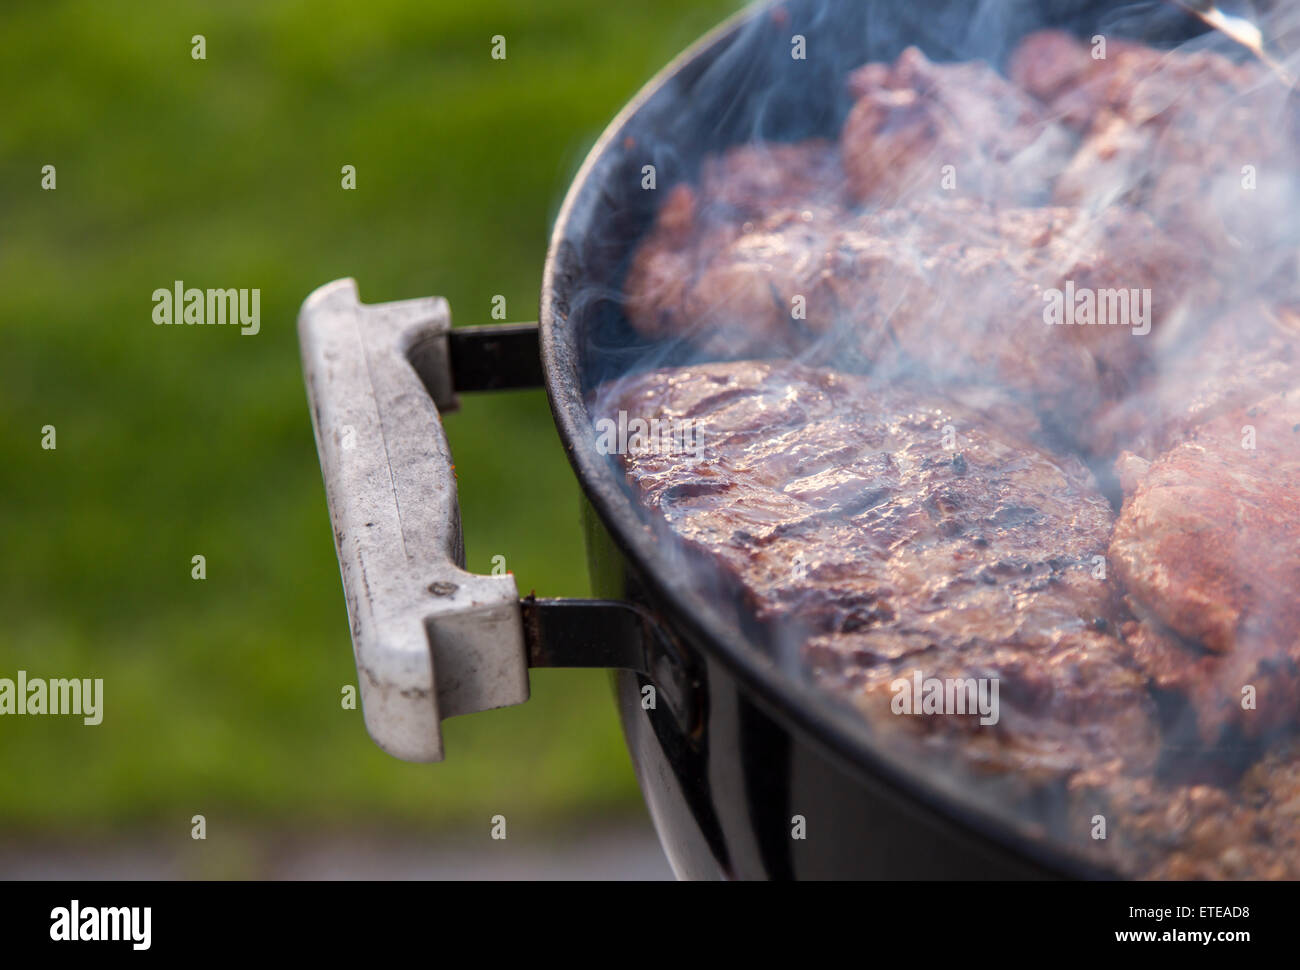 Meat on the Barbeque smoking. Stock Photo